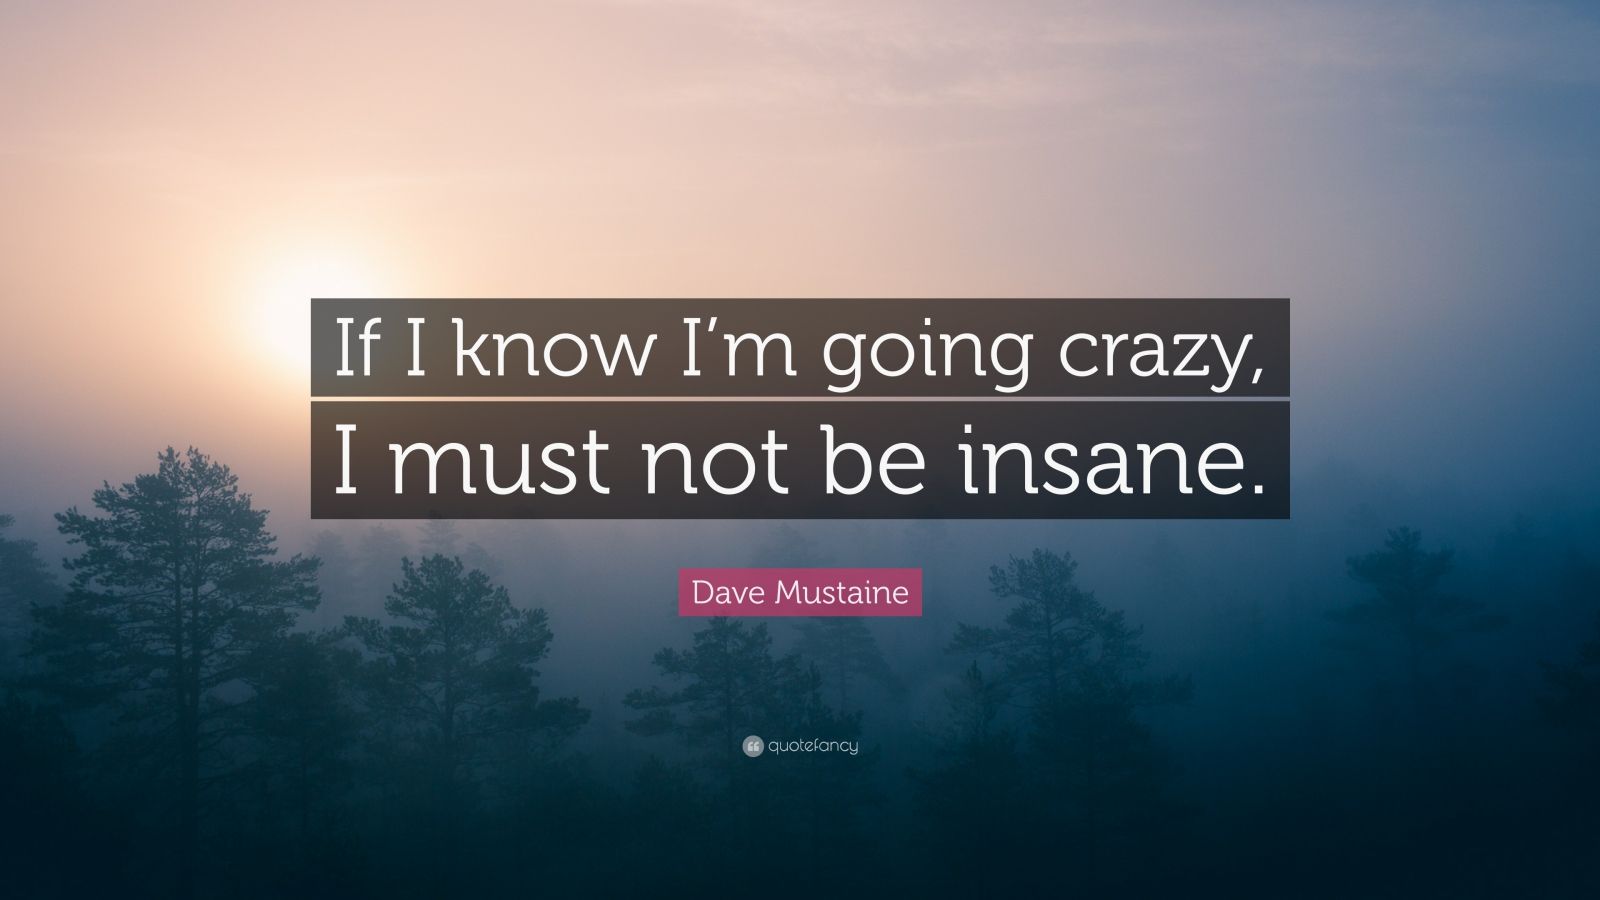 2493236 Dave Mustaine Quote If I know I m going crazy I must not be insane